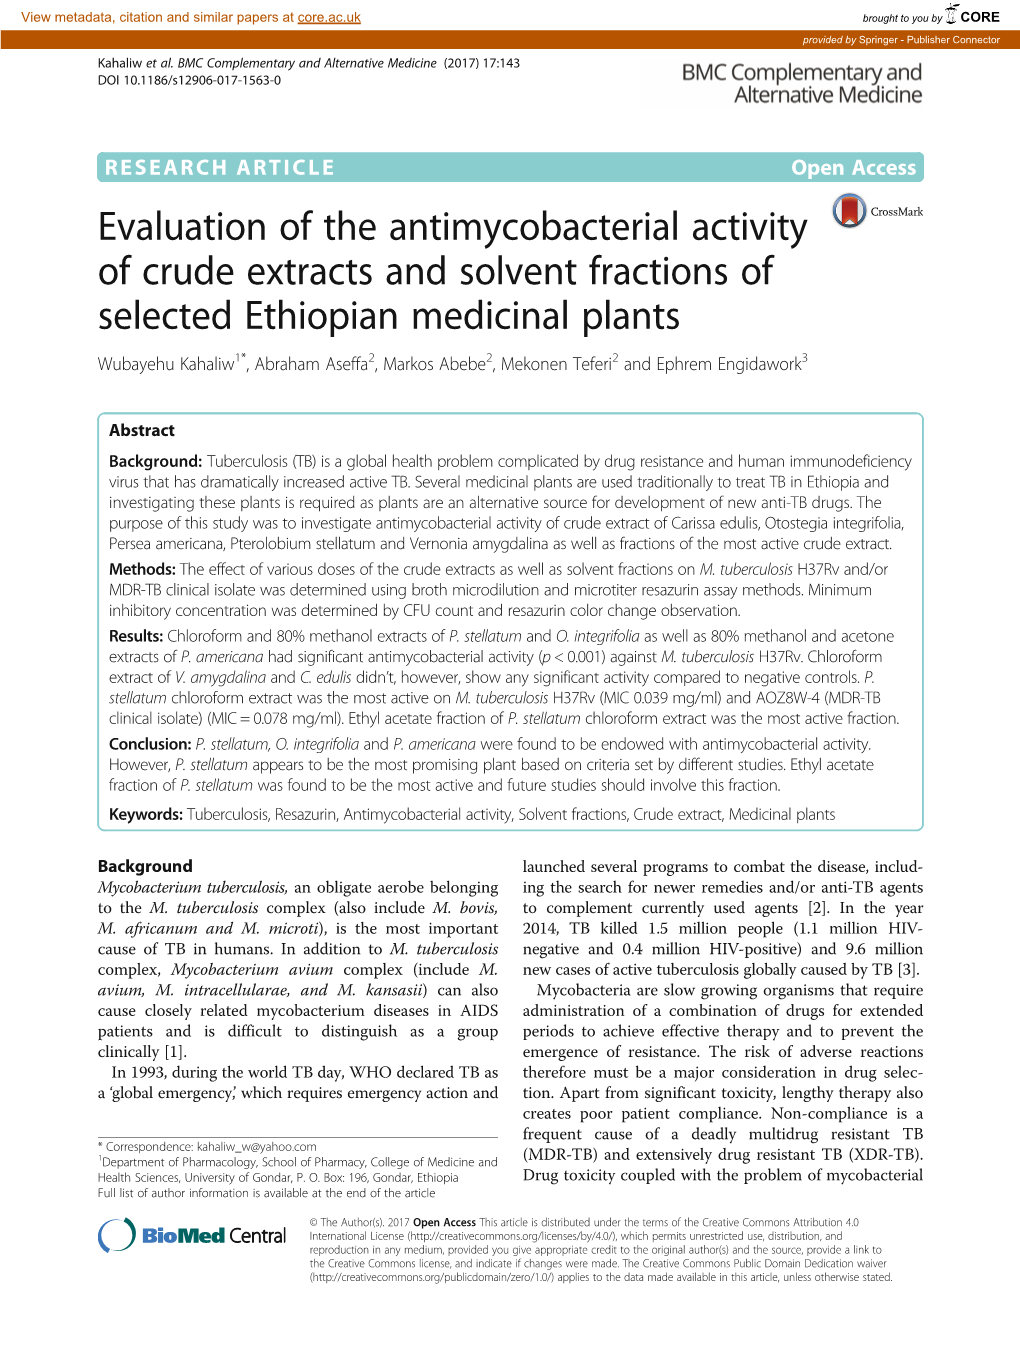 Evaluation of the Antimycobacterial Activity of Crude Extracts and Solvent Fractions of Selected Ethiopian Medicinal Plants